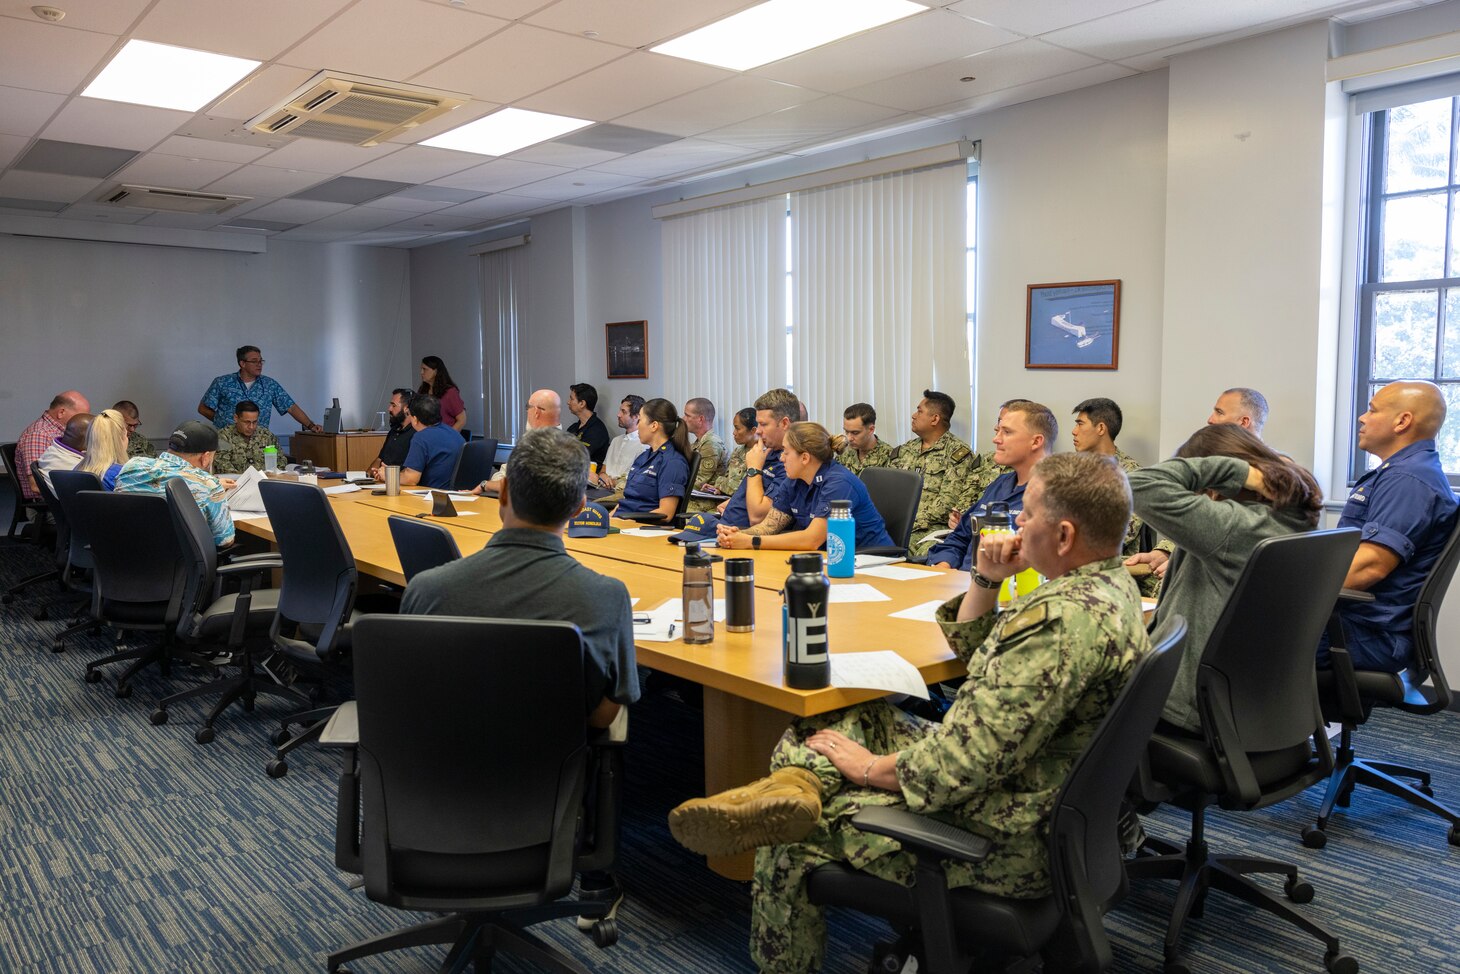 Experts from various organizations, the Environmental Protection Agency and Hawaii Department of Health, participate in a Spill Drill Tabletop Exercise at Joint Base Pearl Harbor-Hickam, Feb. 22. The exercise, run by Navy Closure Task Force - Red Hill (NCTF-RH), rehearsed roles and responsibilities of various stakeholders in the event of a potential spill at the Red Hill Bulk Fuel Storage Facility (RHBFSF) and is a key milestone in the transition of efforts from Joint Task Force-Red Hill. Charged with the safe decommissioning of the RHBFSF, NCTF-RH was established by the Department of the Navy as a commitment to the community and the environment. The Navy continues to engage with the people of Hawaii, regulatory agencies, and other stakeholders as NCTF-RH works to safely and deliberately decommission the RHBFSF. (U.S. Navy photo by Mass Communications Specialist Seaman Krystal Diaz)